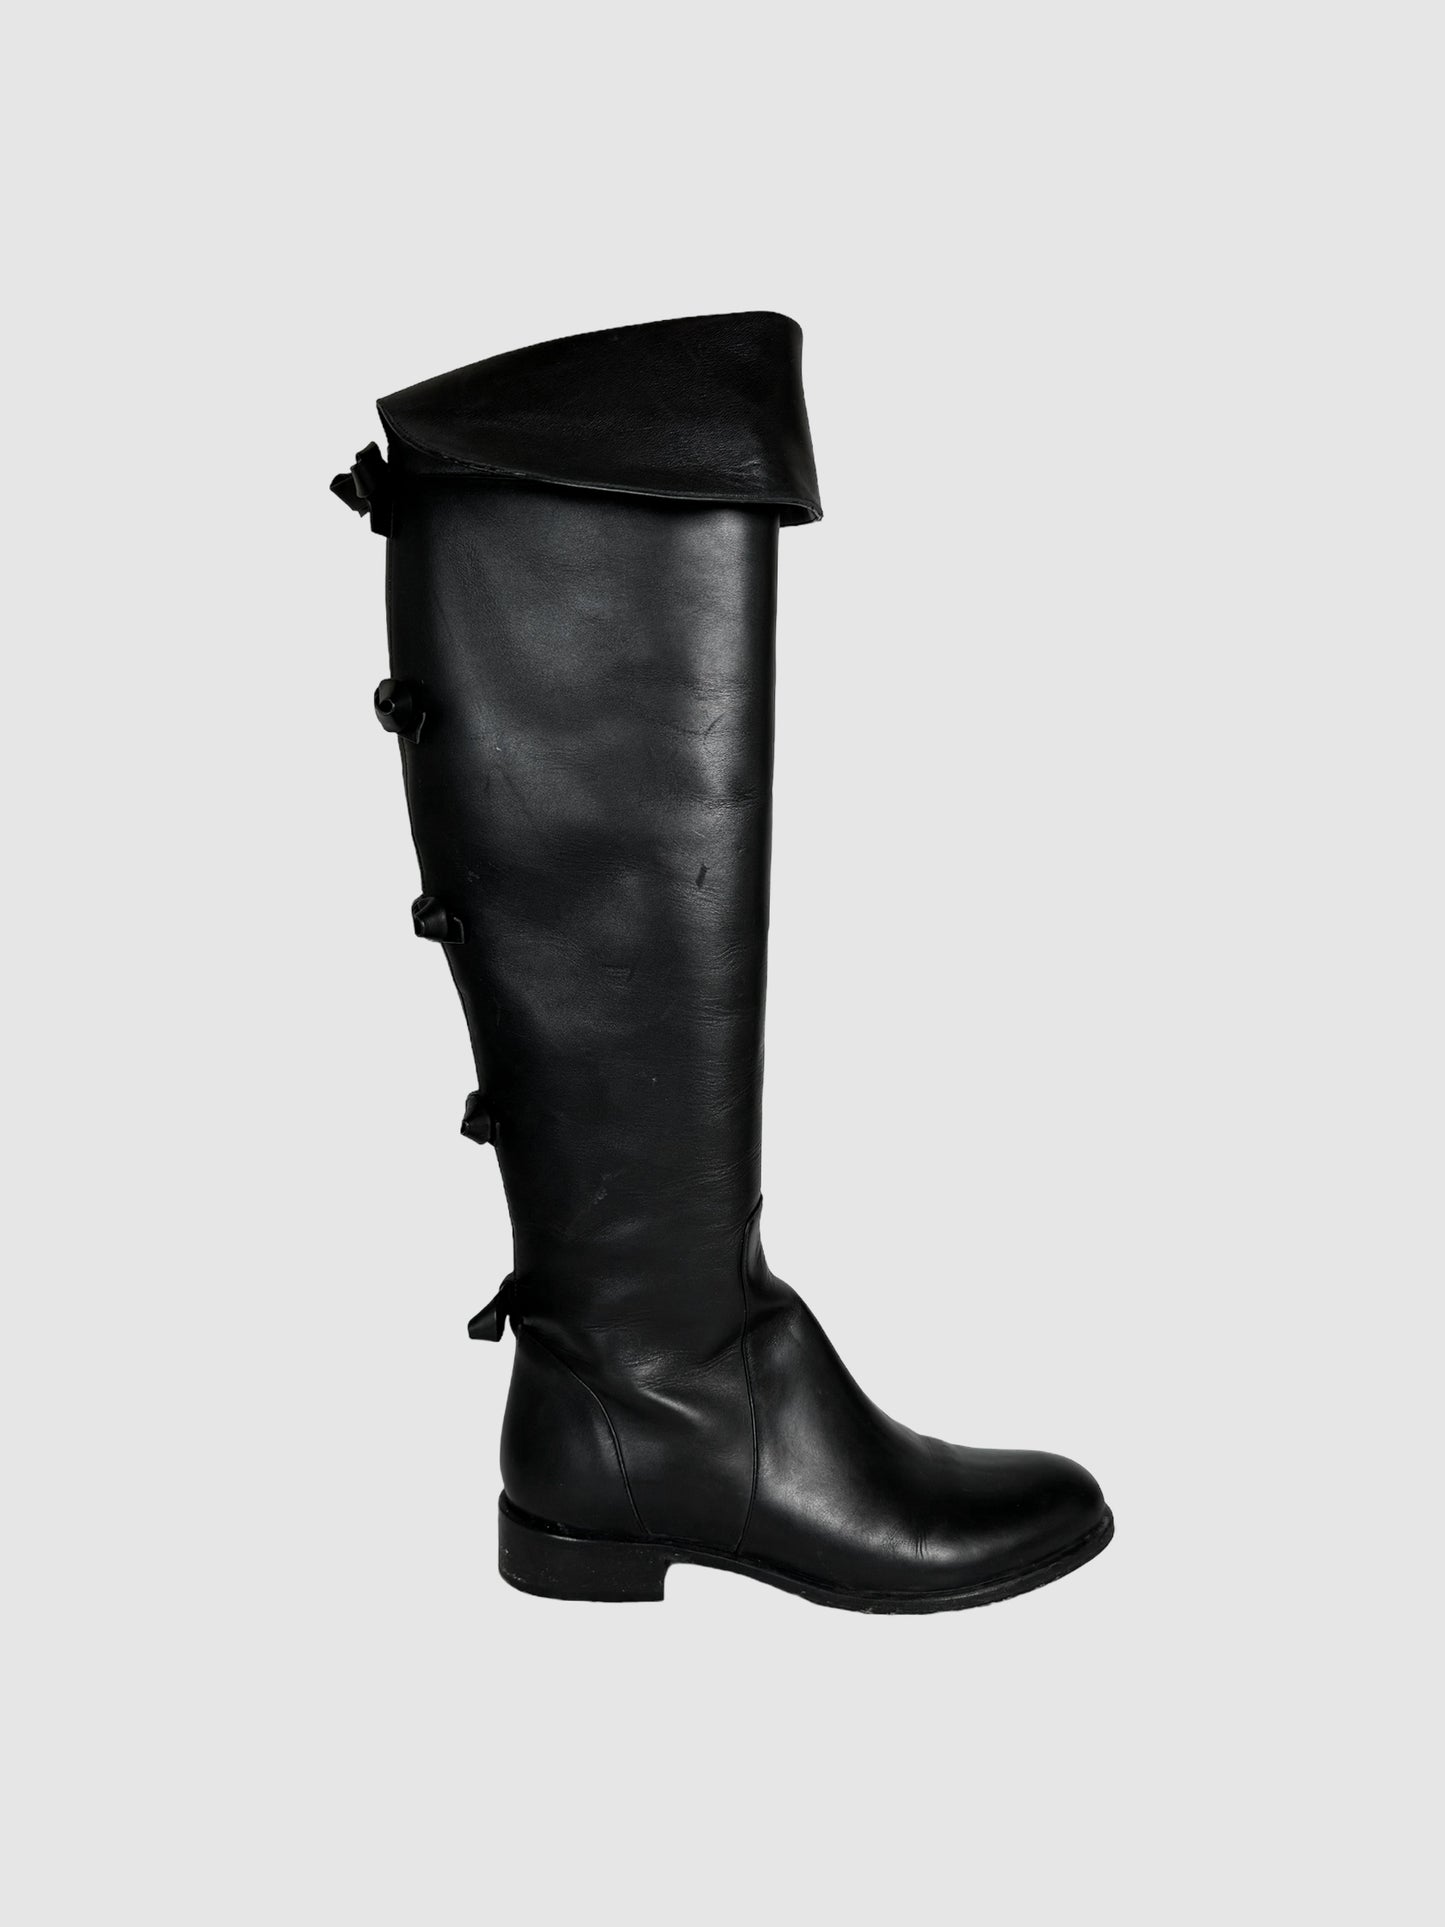 Valentino Black Garavani Leather Over-the-Knee Back Bows Tall Boots Consignment Secondhand Luxury